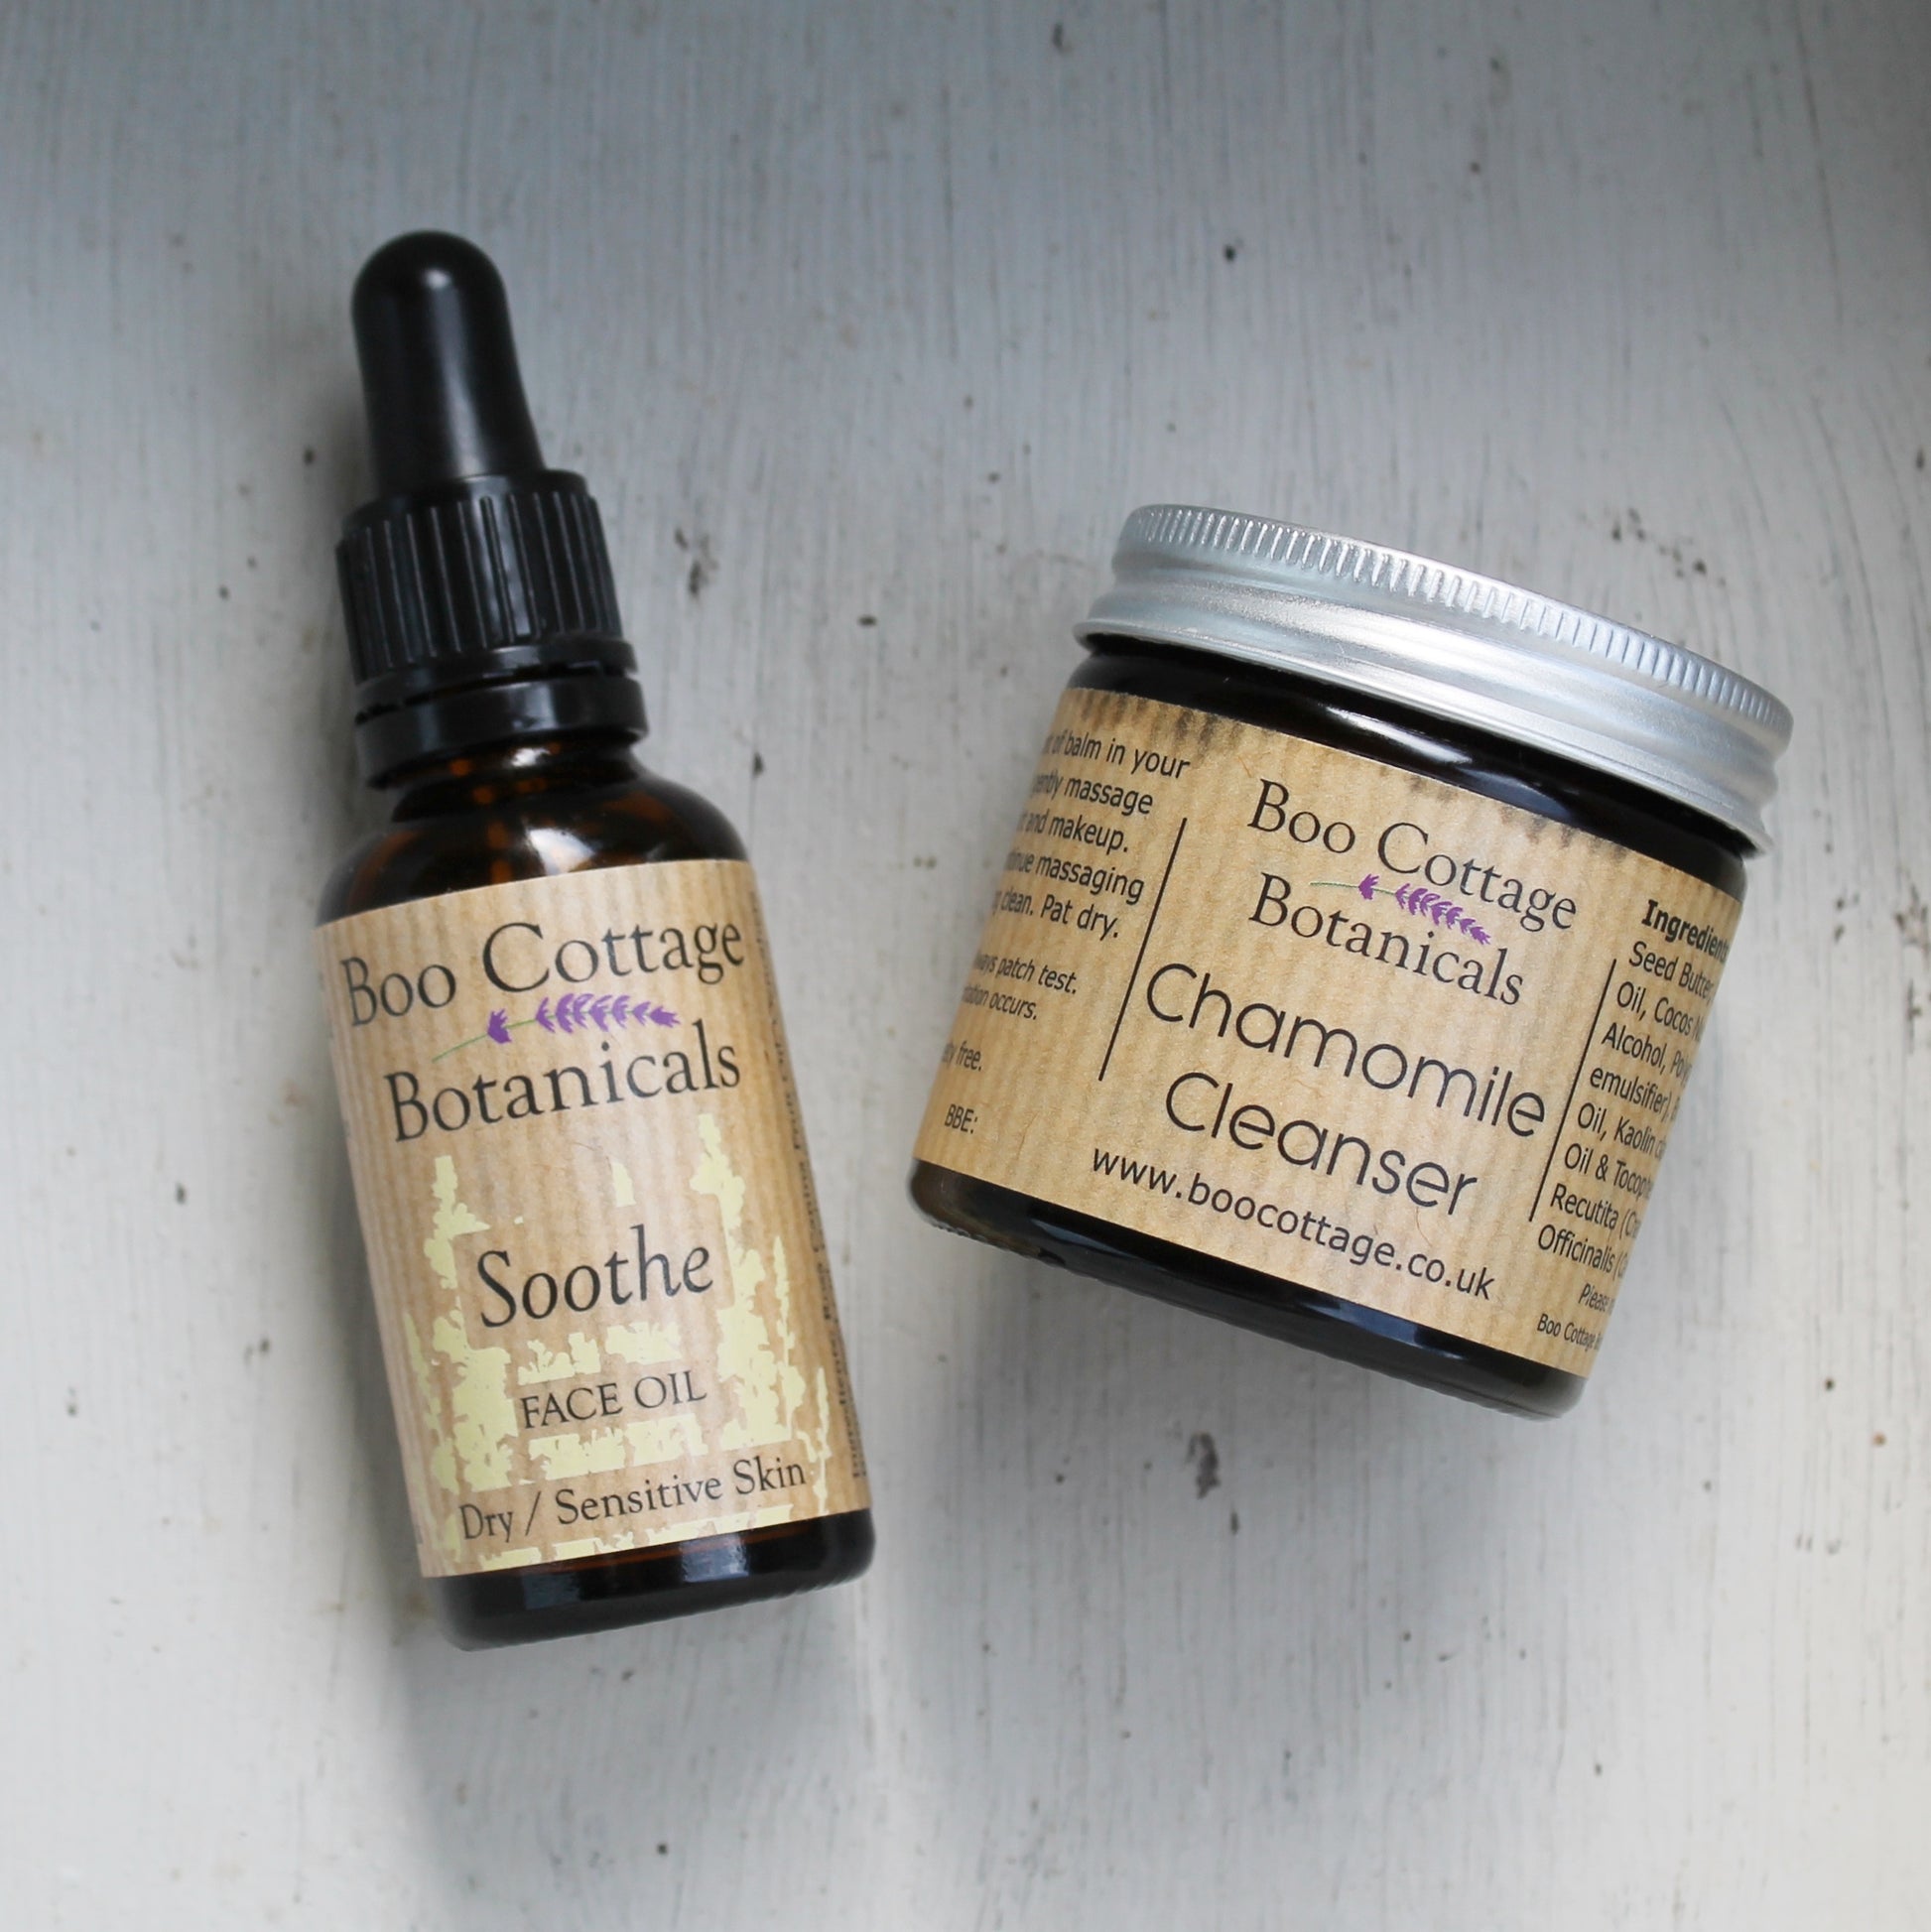 Soothe face oil and Chamomile cleanser in amber bottle and jar on white painted background